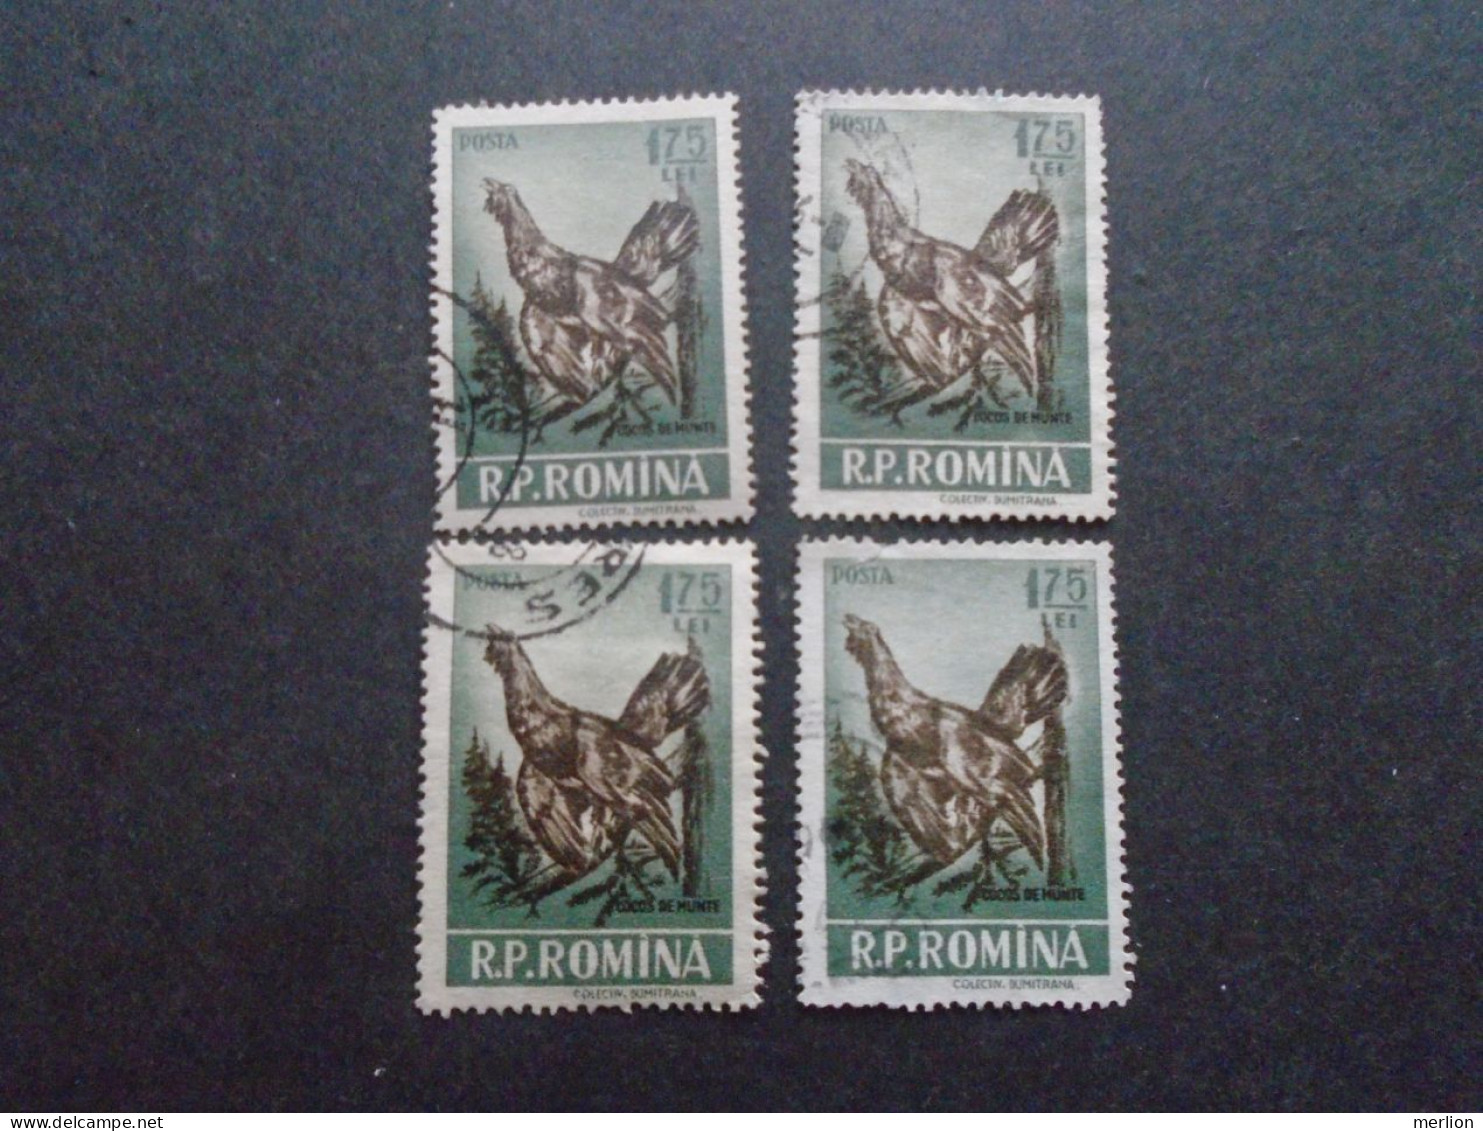 D202280  Romania - 1955  -  Lot Of 4 Used Stamps  Blackcock  Grouse  1573 - Oblitérés